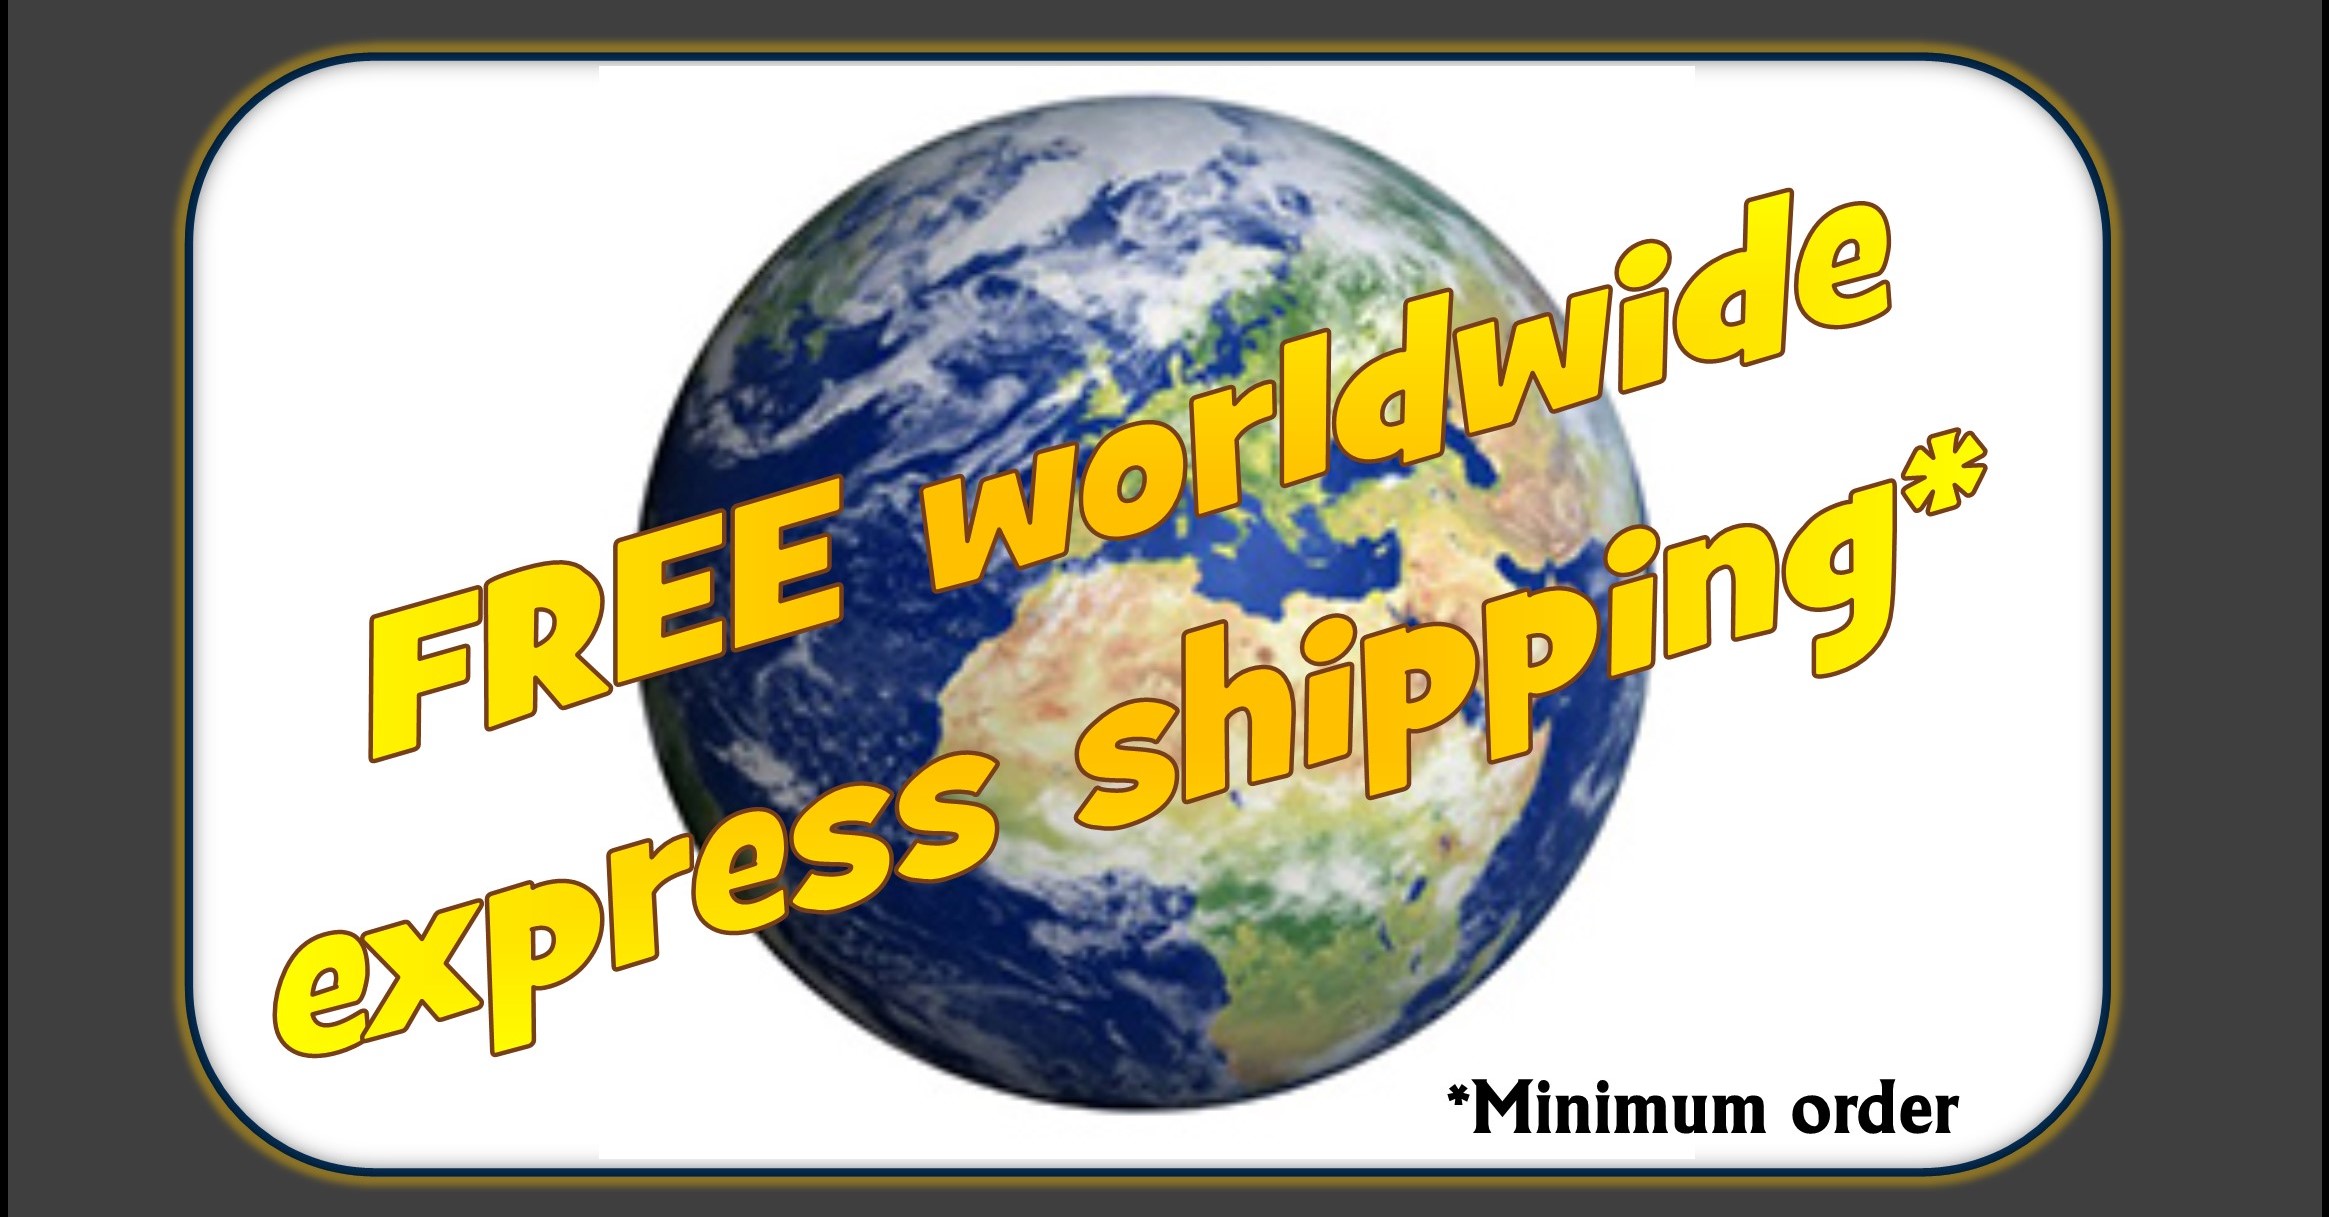 Free worldwide express delivery to all customers purchasing 5 or more webbing up kites from J R Press Supplies